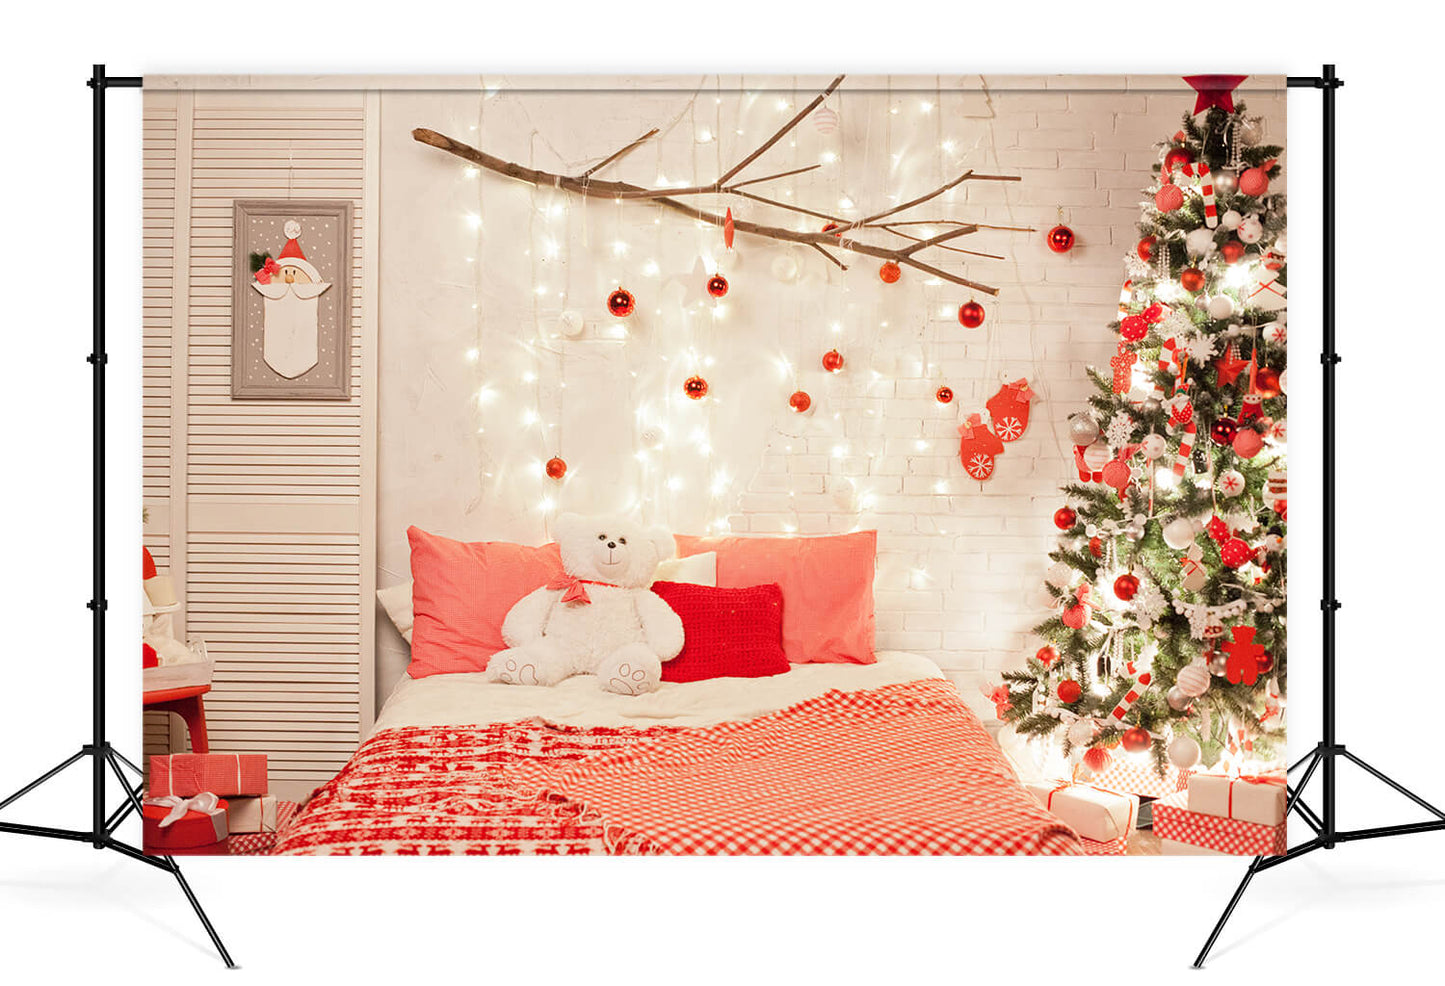 Christmas Tree Bedroom with Lights Backdrop M11-42